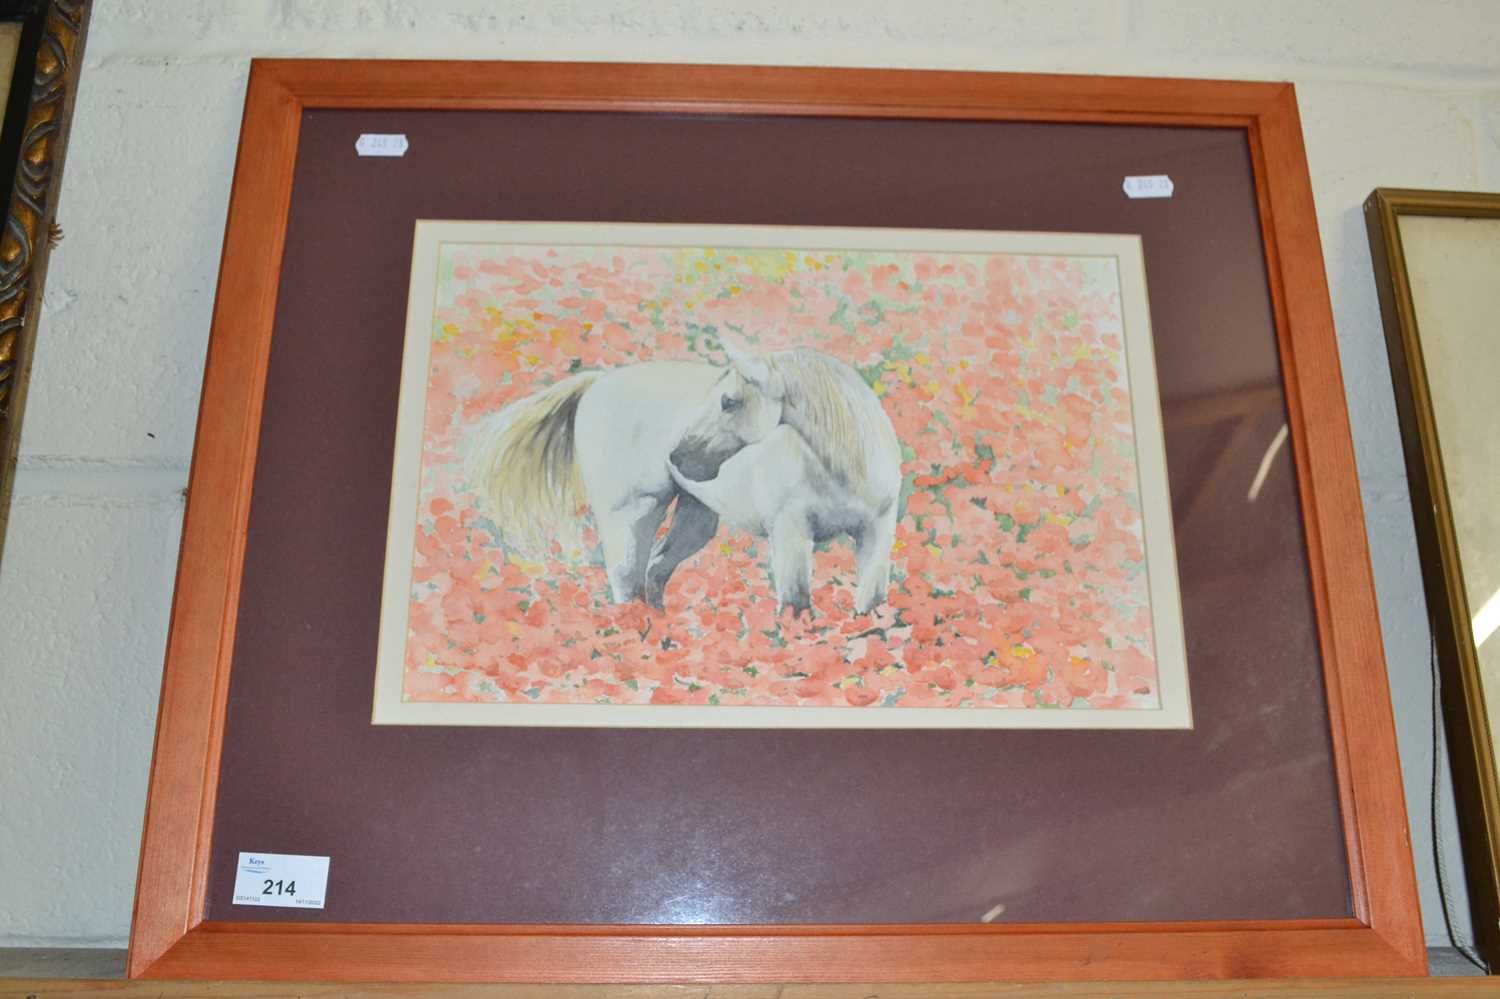 Claire Moore, study of grey horse amongst flowers, framed and glazed